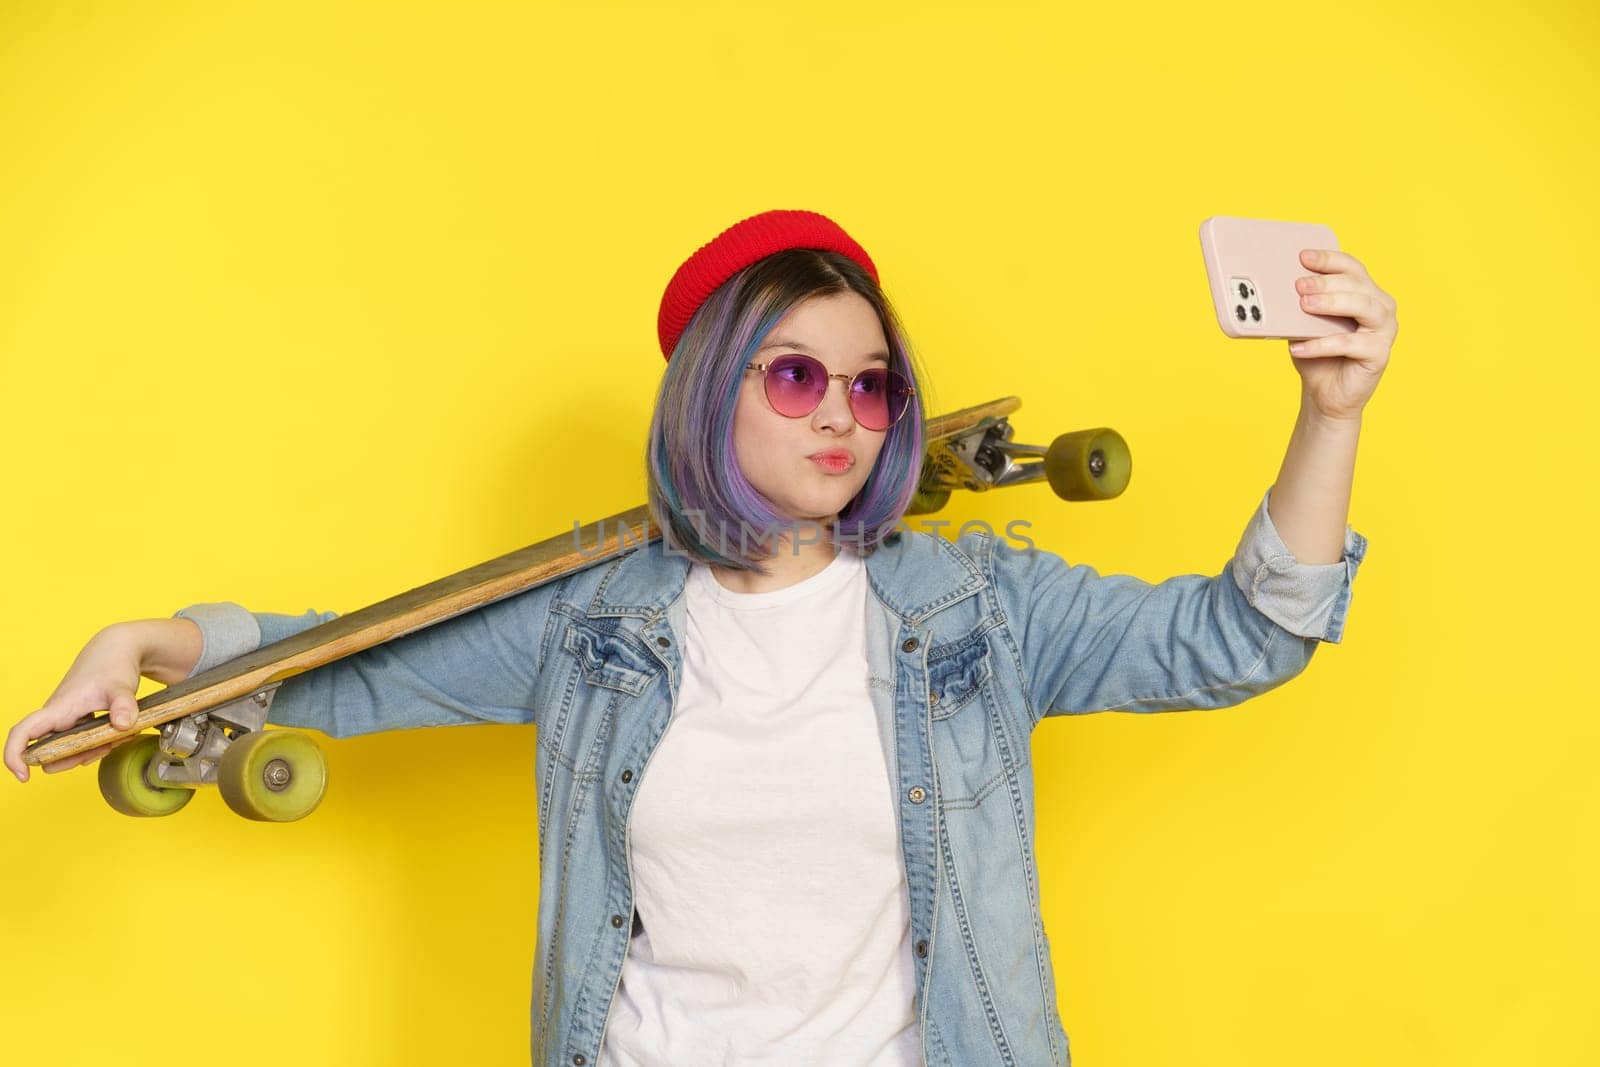 Trendy Teenager In Casual Wear Captures Selfie With Longboard Or Skateboard, Showcasing Blend Of Modern Lifestyle, Fashion, And Youth Culture. Trendy Attire And Activities Associated With Contemporary Teenagers. High quality photo